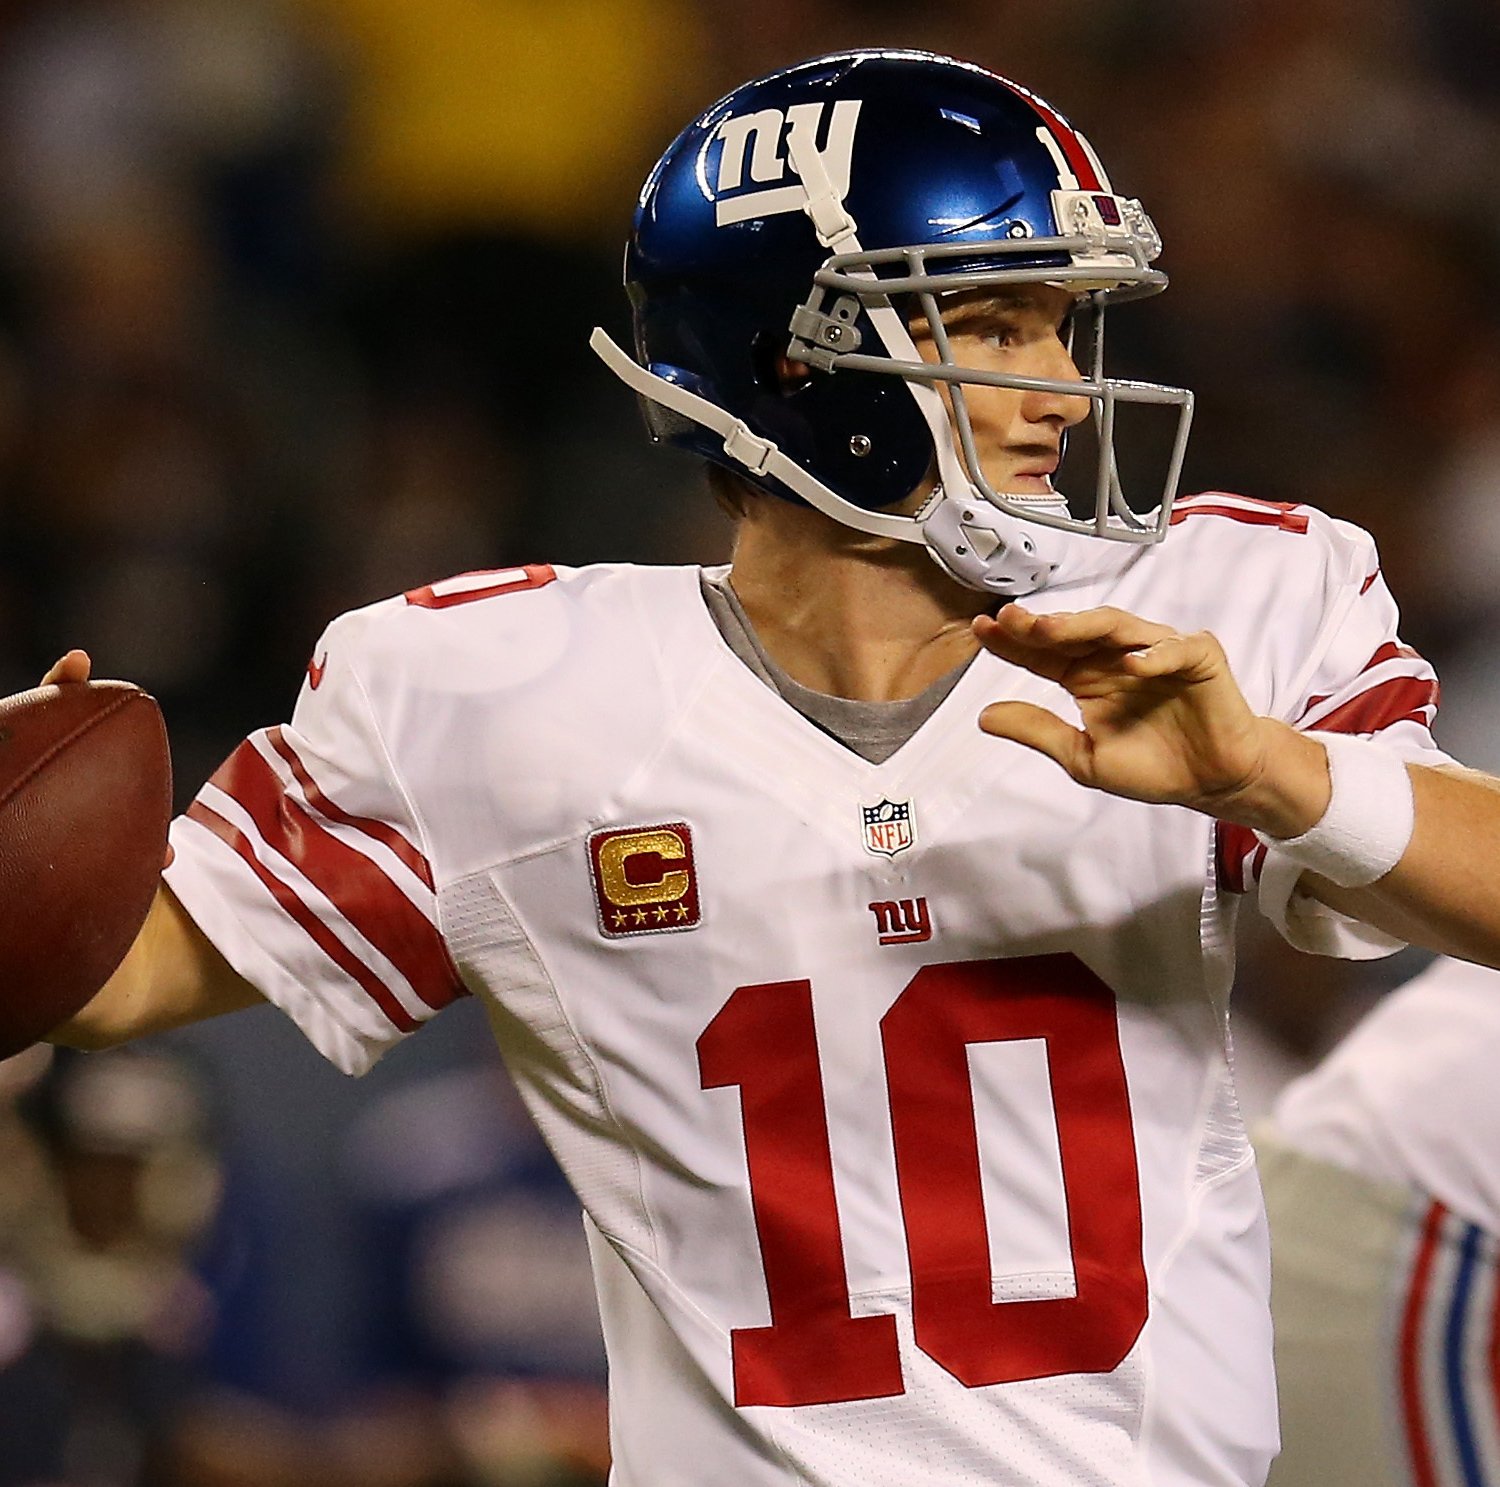 New York Giants: Why They Shouldn't Give Up on Eli Manning | Bleacher Report